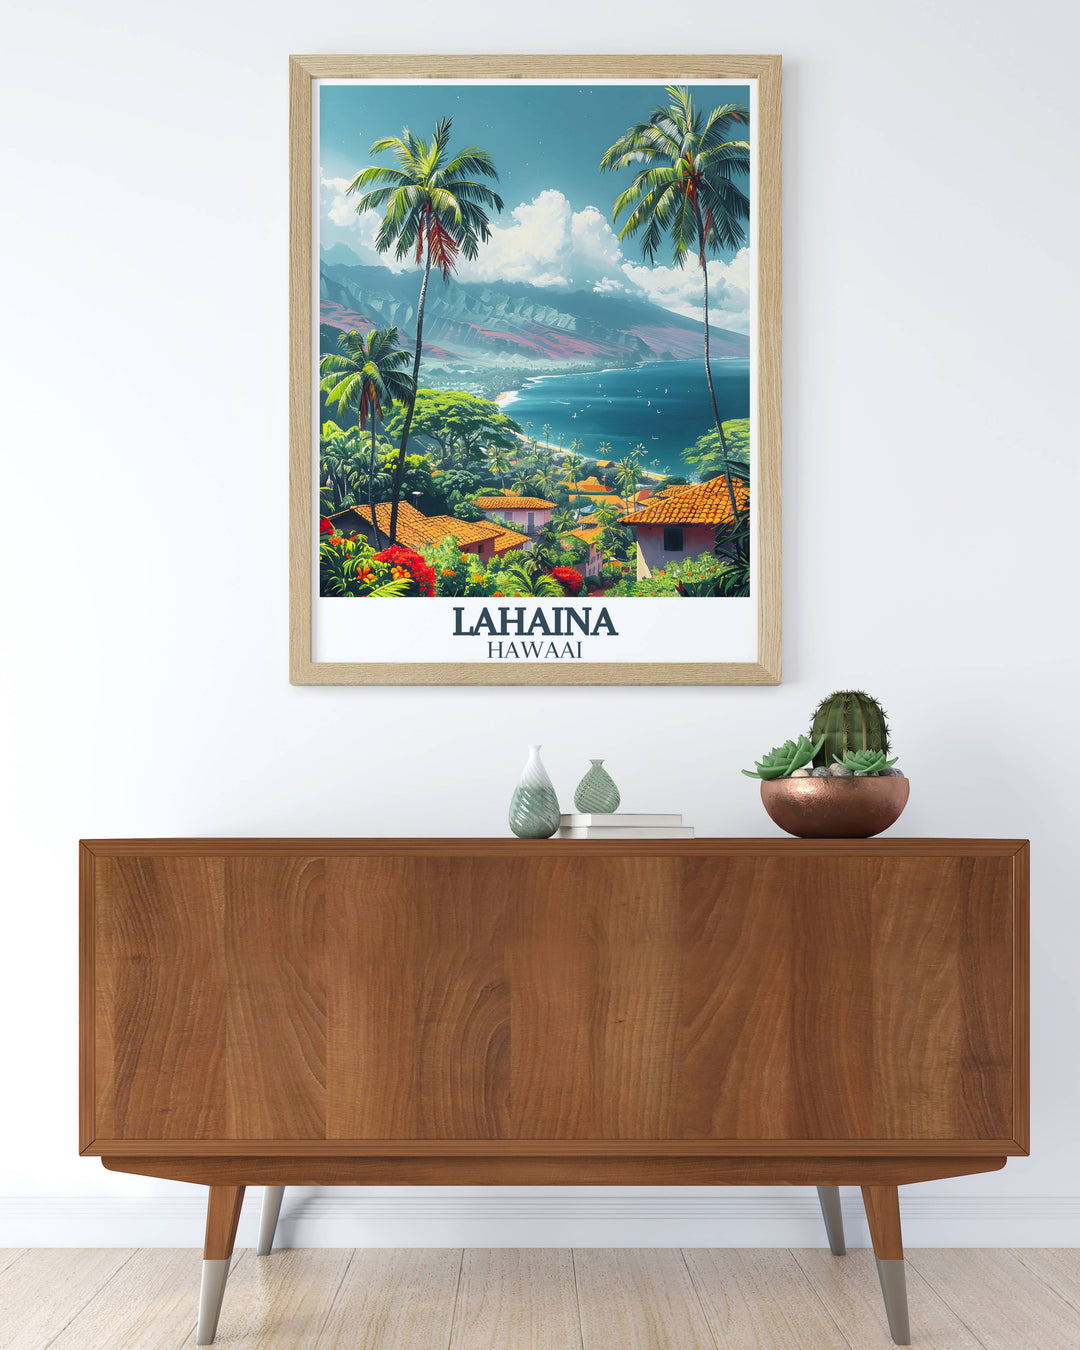 Custom print of a Lahaina sunset over the ocean, personalized to add a unique Hawaiian touch to your home decor.